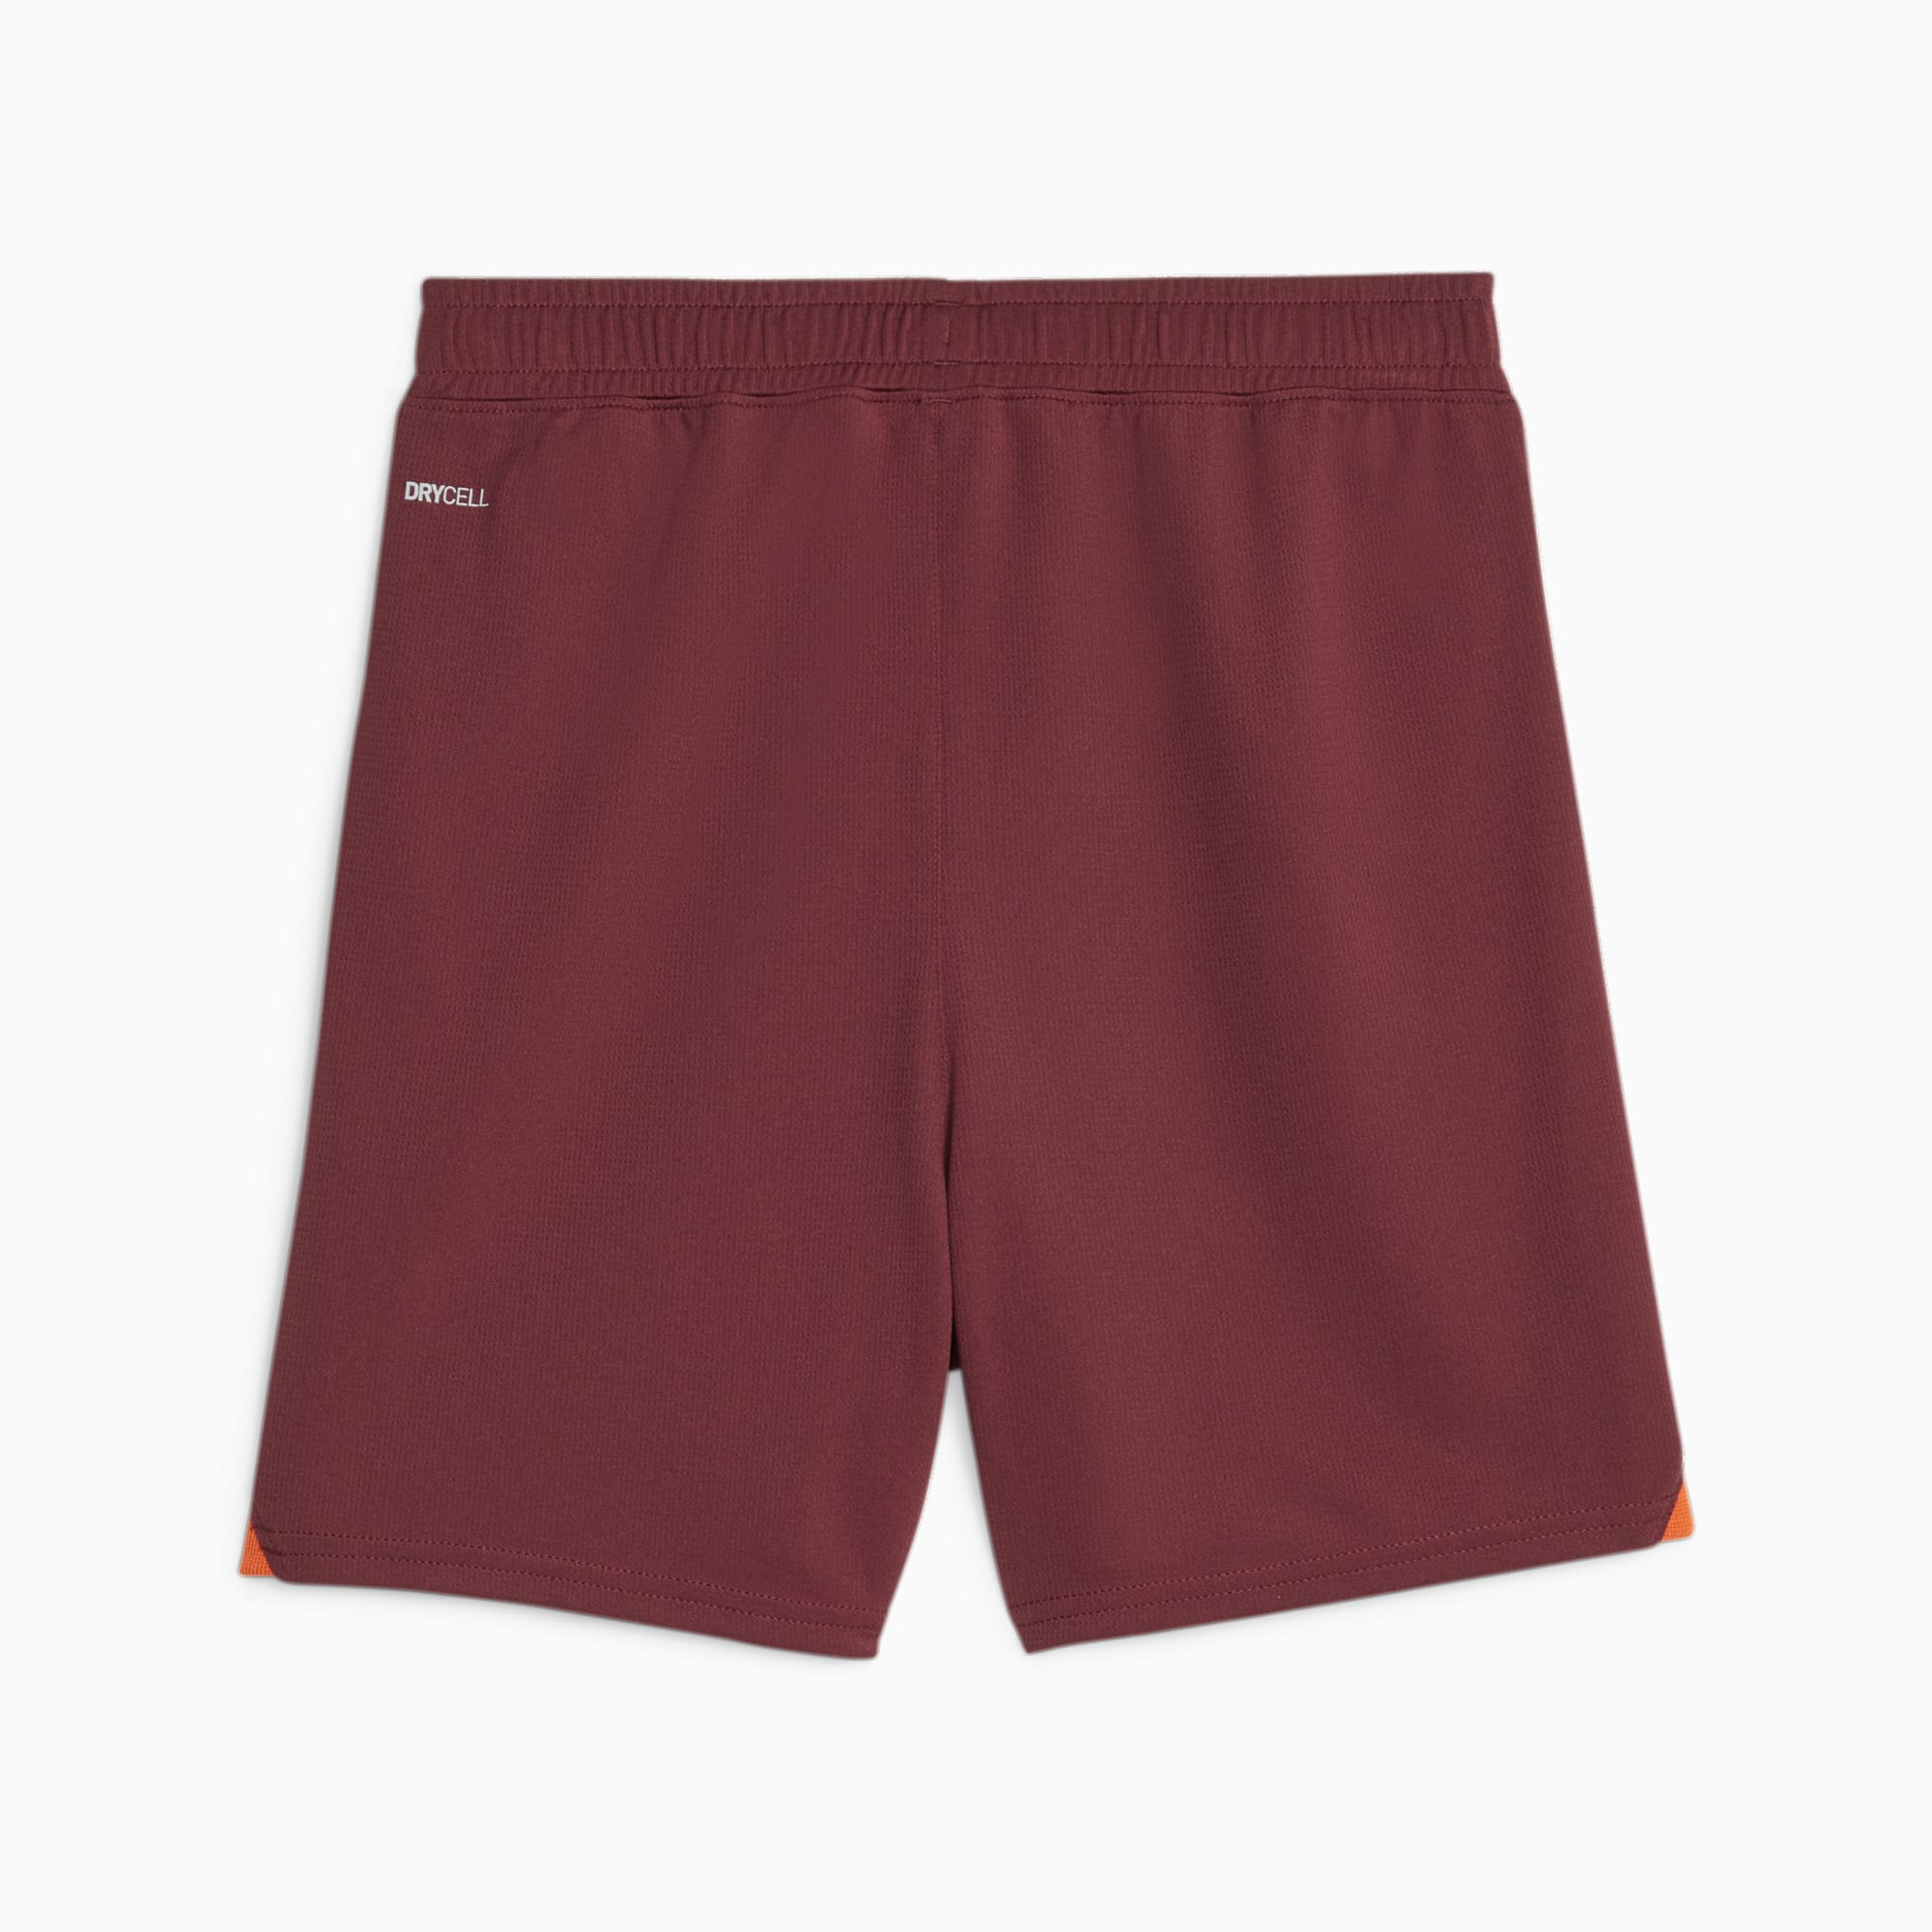 PUMA Manchester City Youth Football Shorts, Aubergine/Cayenne Pepper, Size 116, Clothing